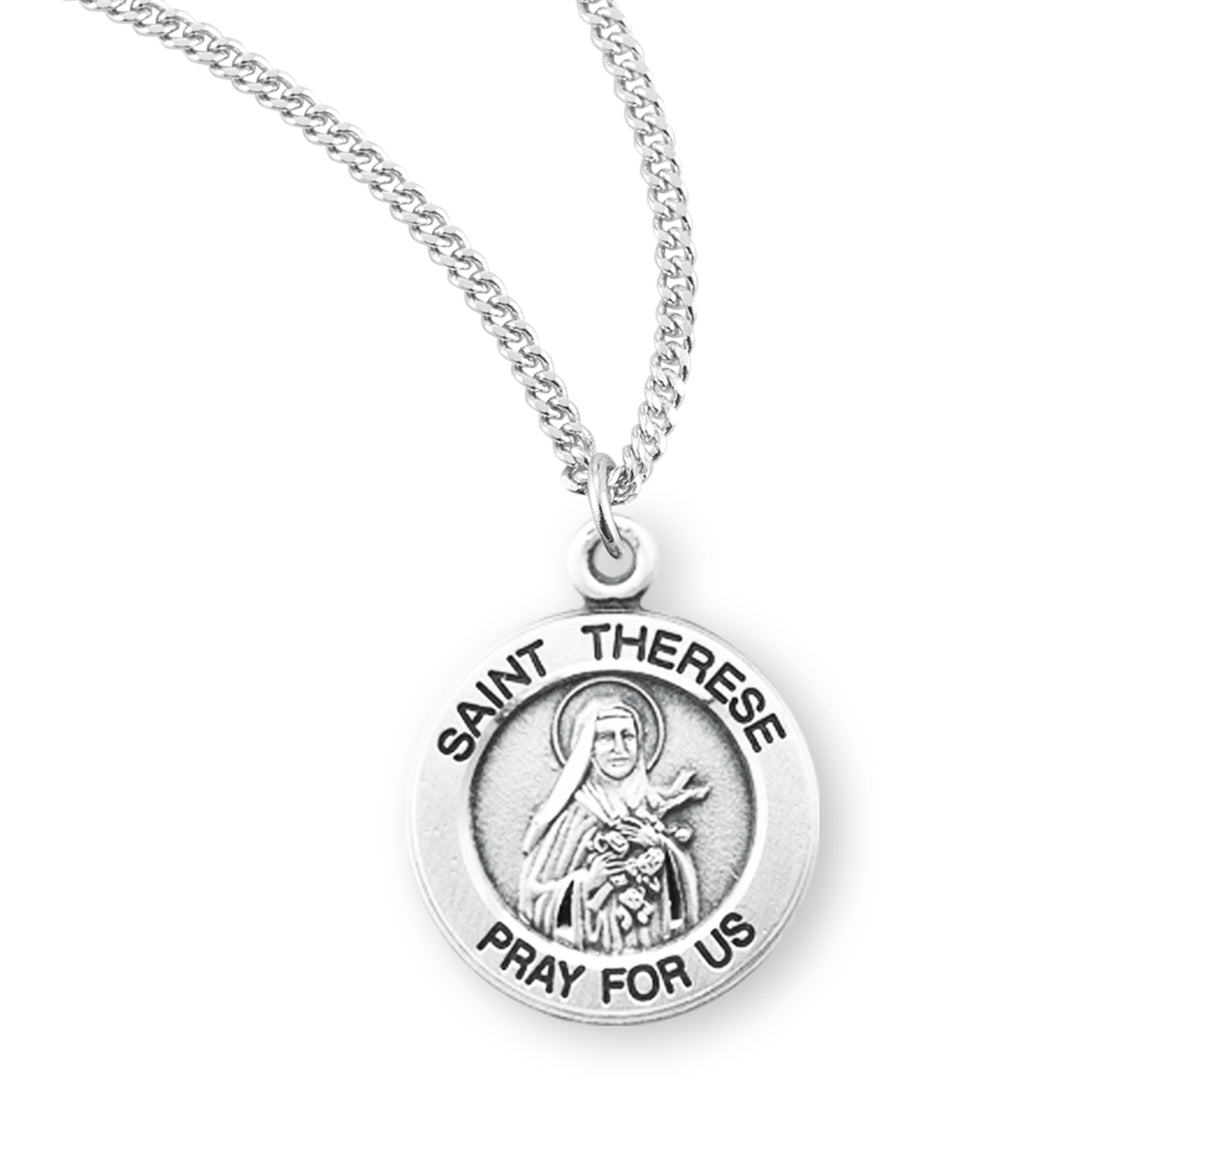 Patron Saint Therese of Lisieux Round Sterling Silver Medal